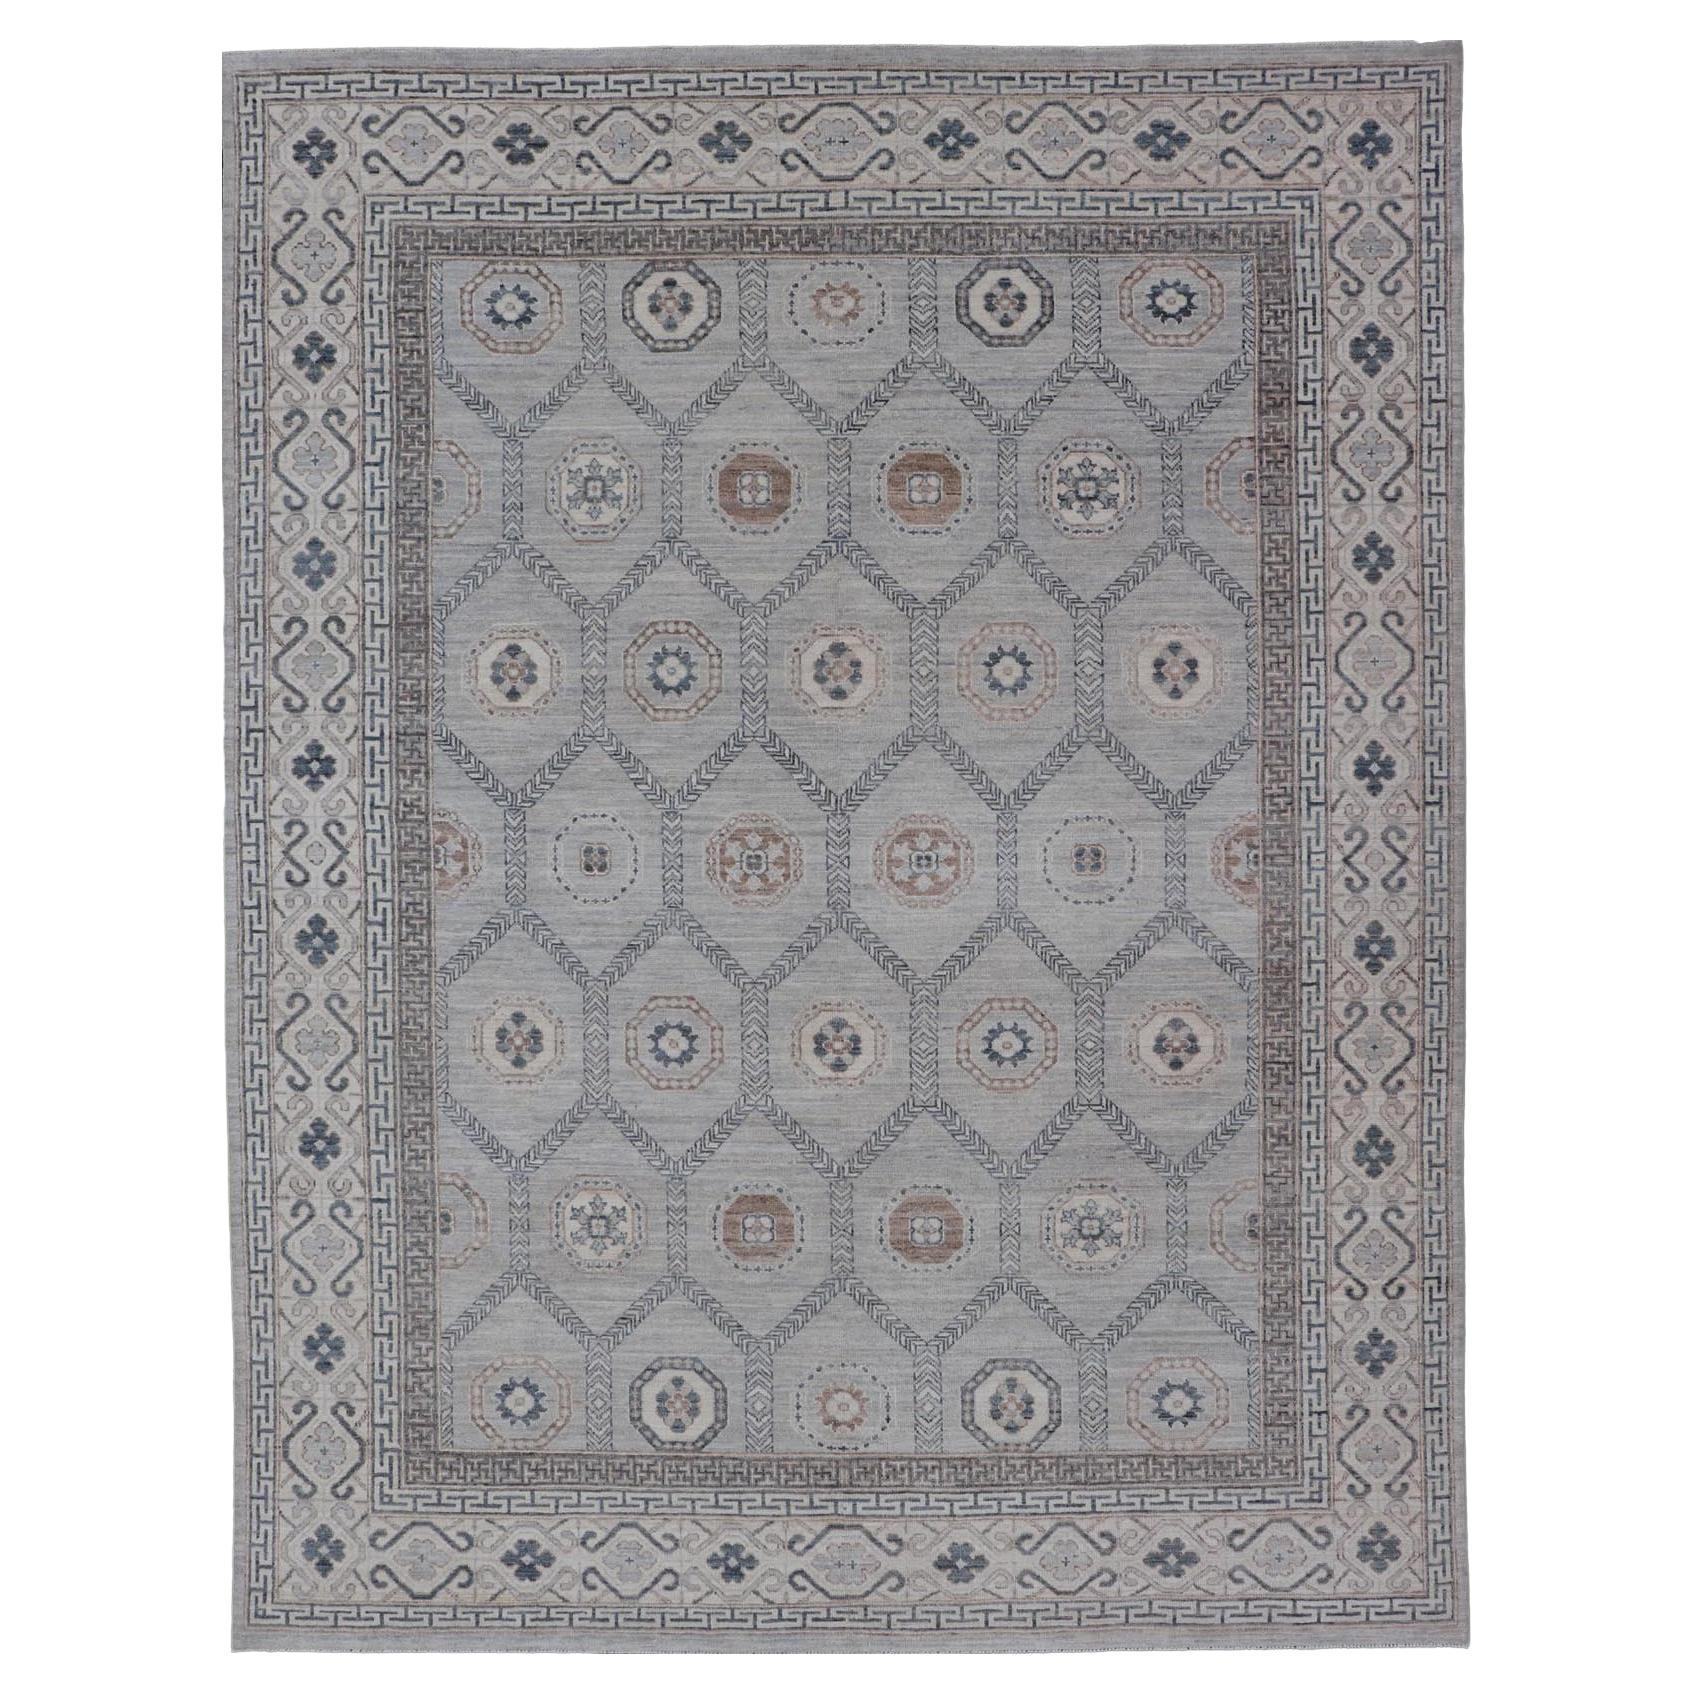 Afghan Sub-Geometric Mosaic Khotan Rug with Muted Tones of Blue and Brown For Sale